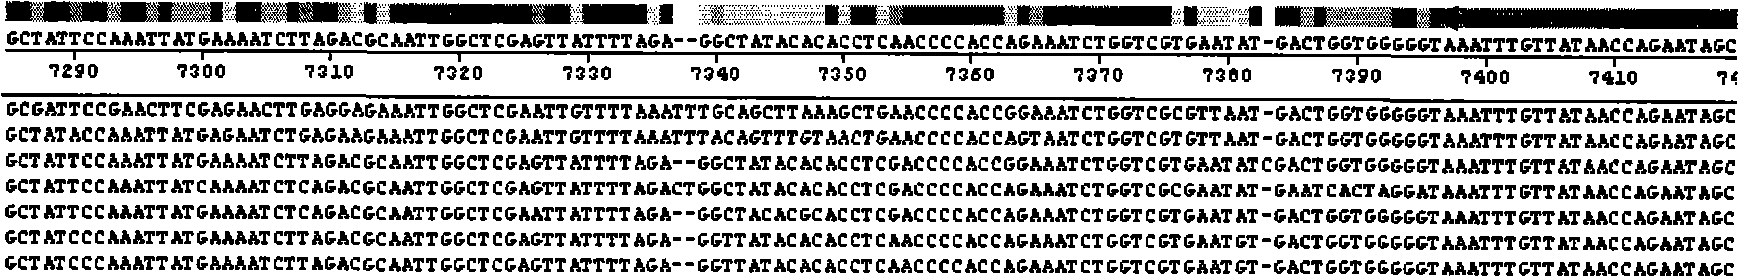 Sequence of enterovirns type71 genome and uses thereof